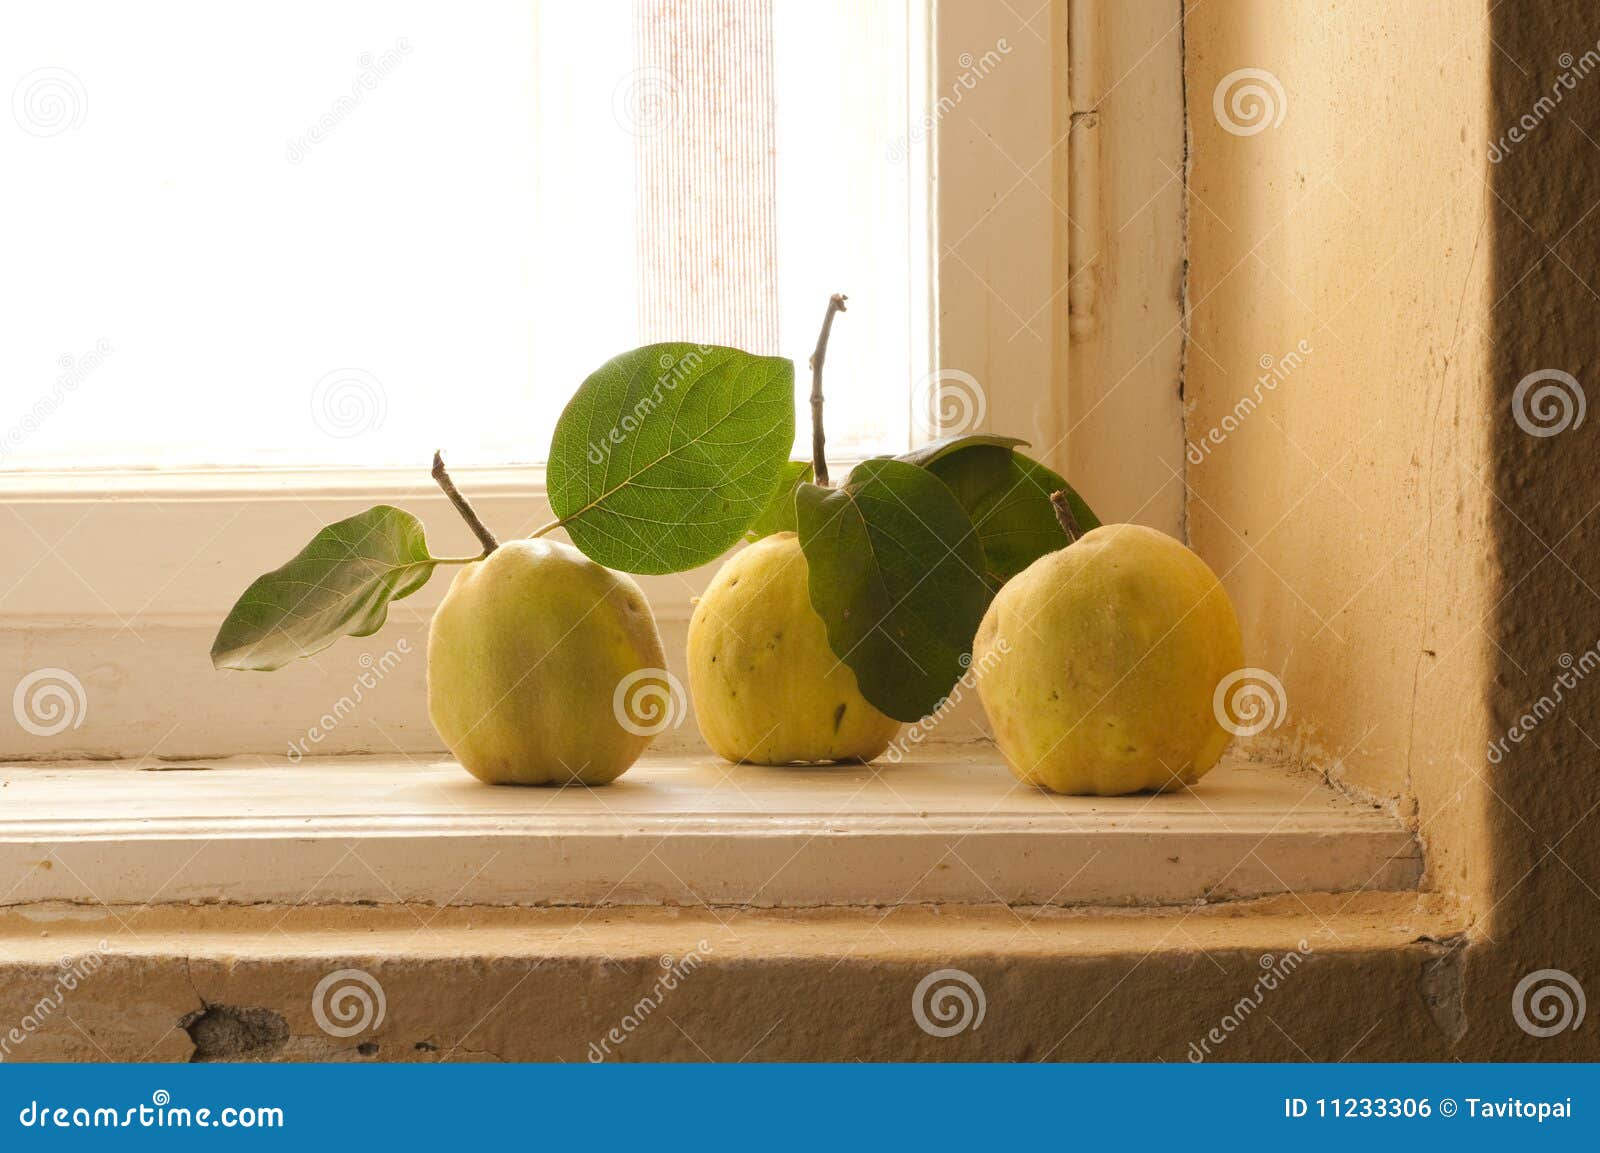 quince on the window sill